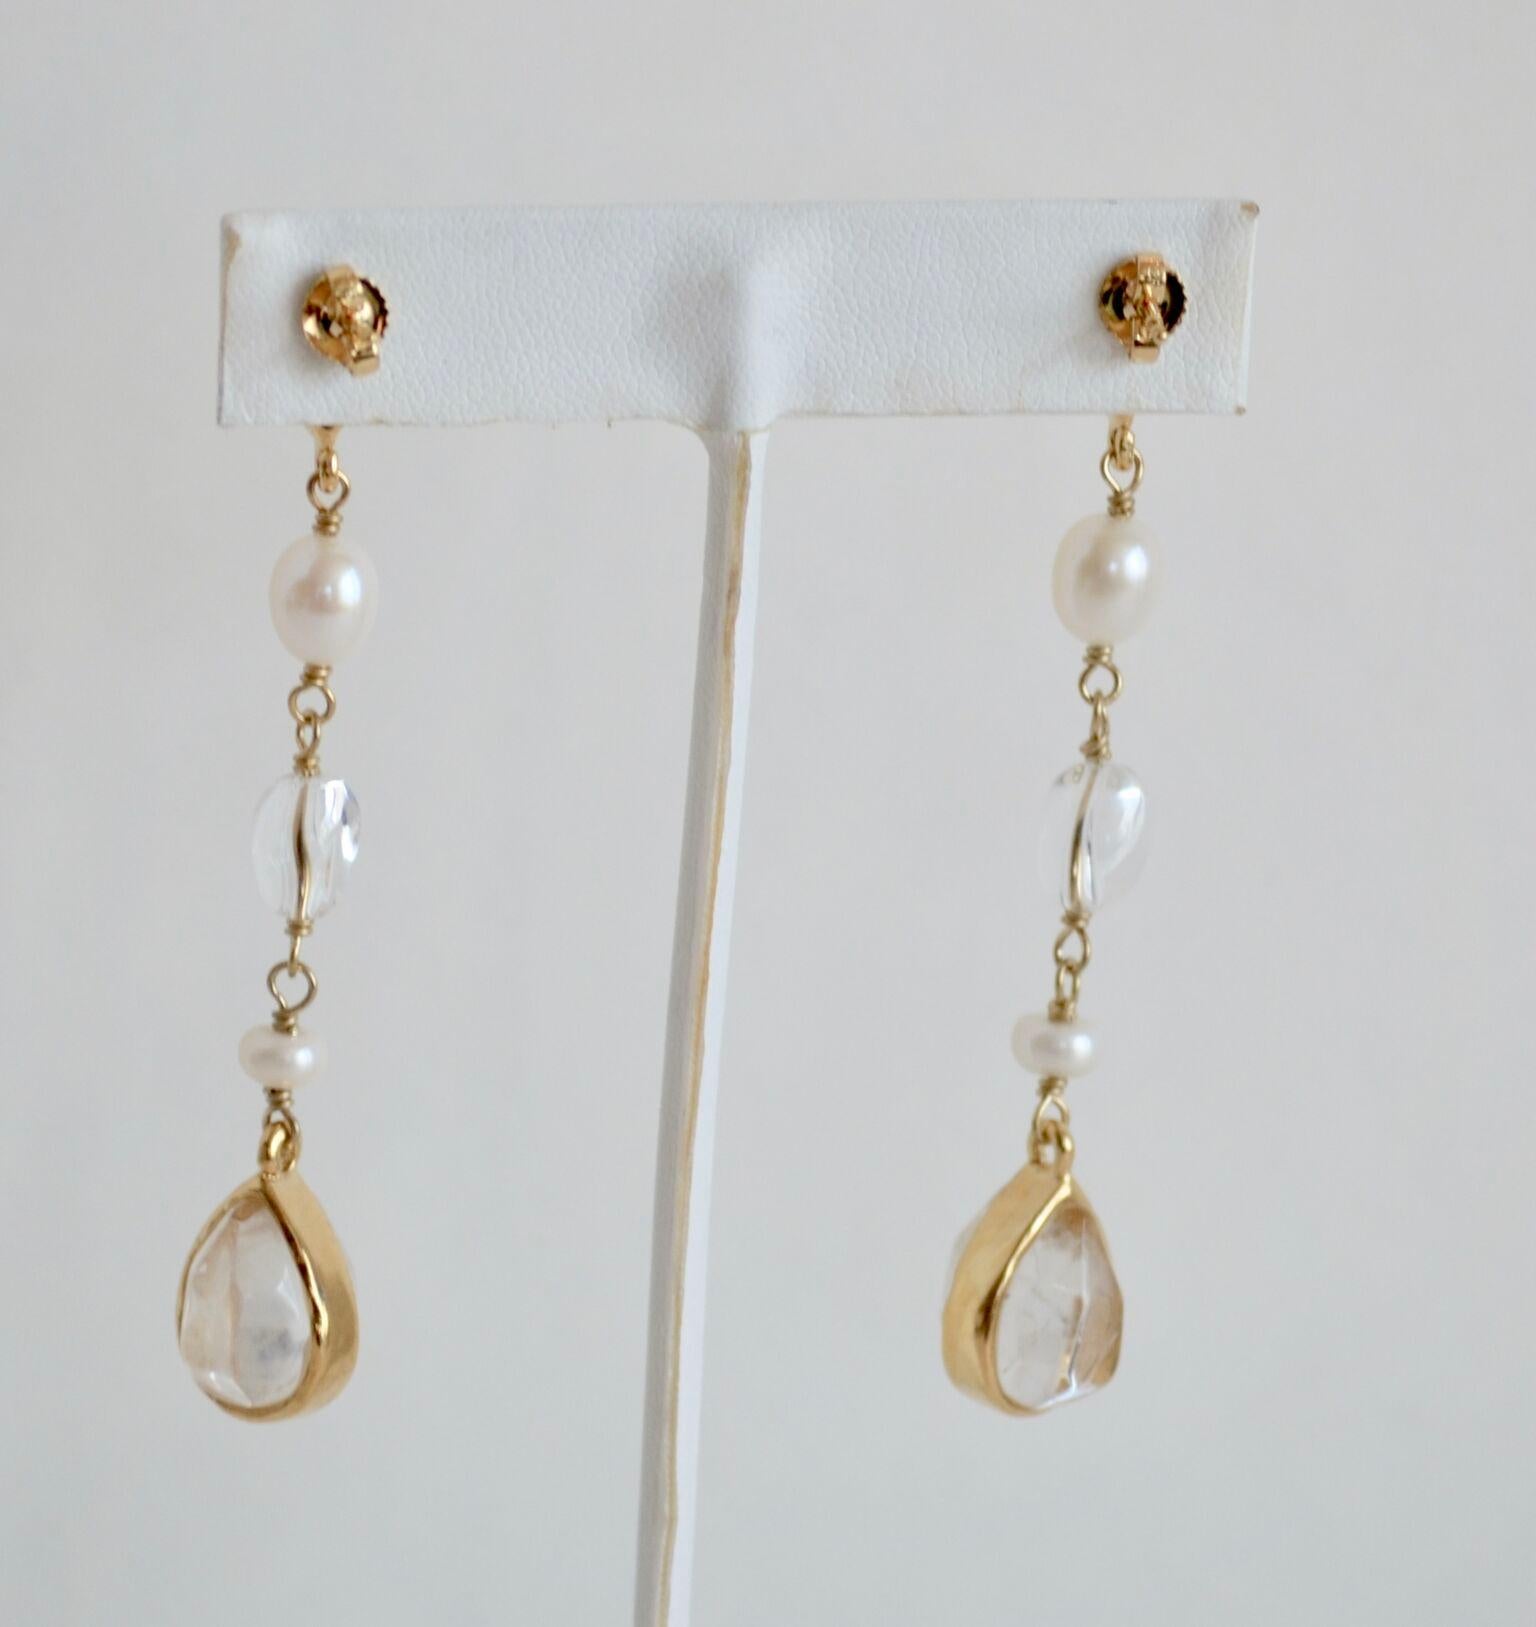 Pierced earrings made with 24-karat gold plated brass, natural pear-shaped rock crystal stones and freshwater pearls.

All the stones are cut by hand for the House of Goossens.
